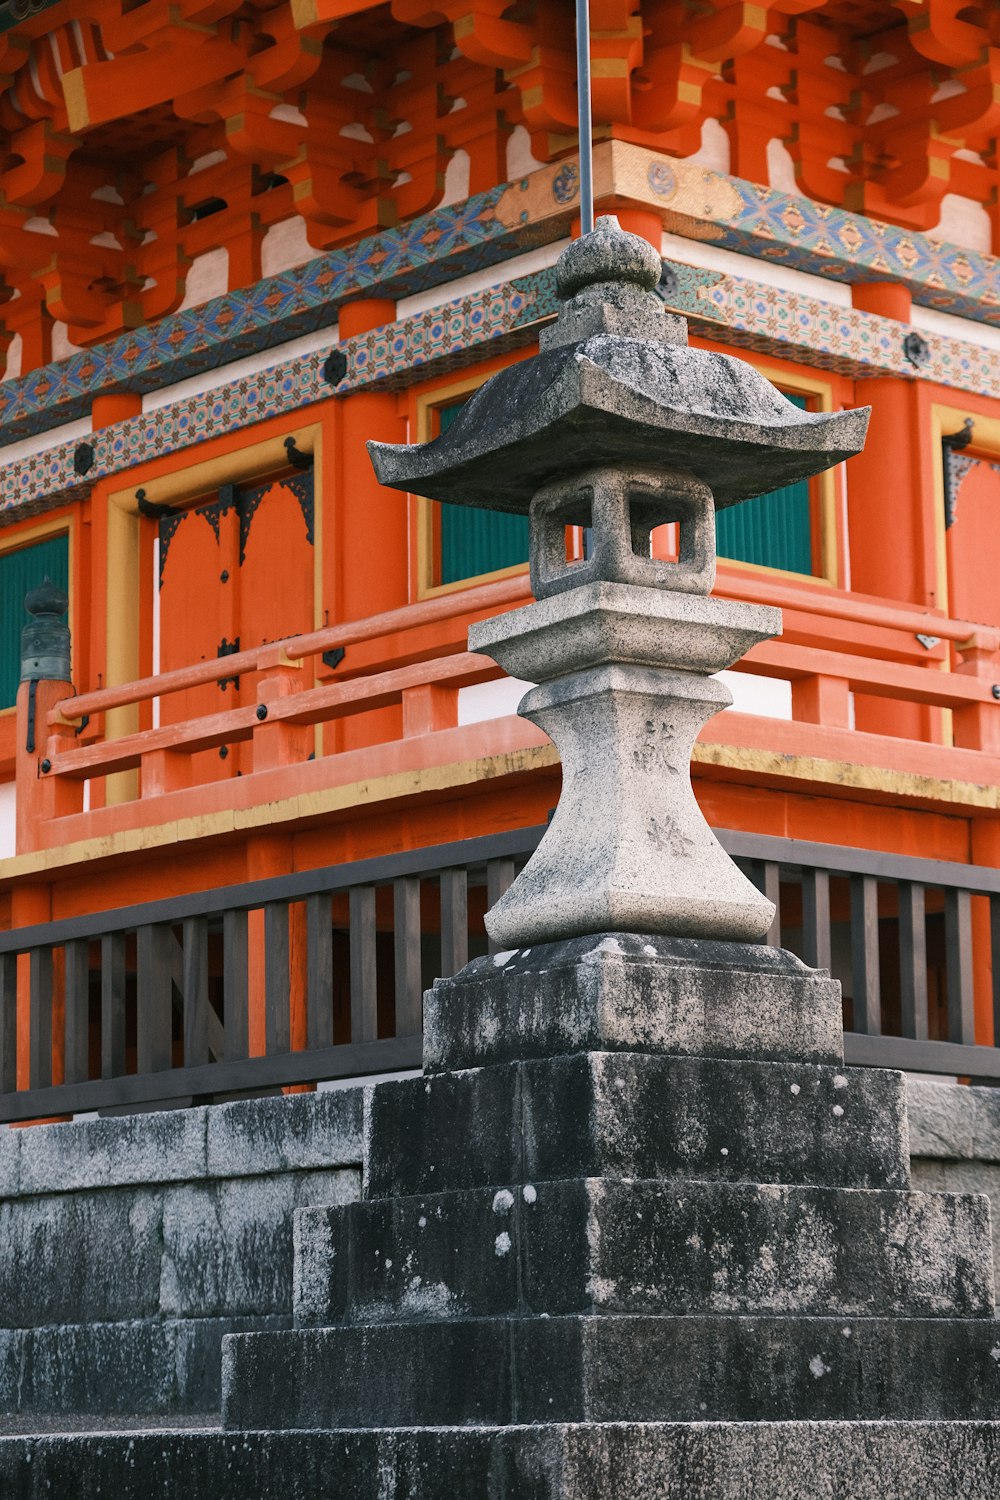 a stone lantern in front of an orange building